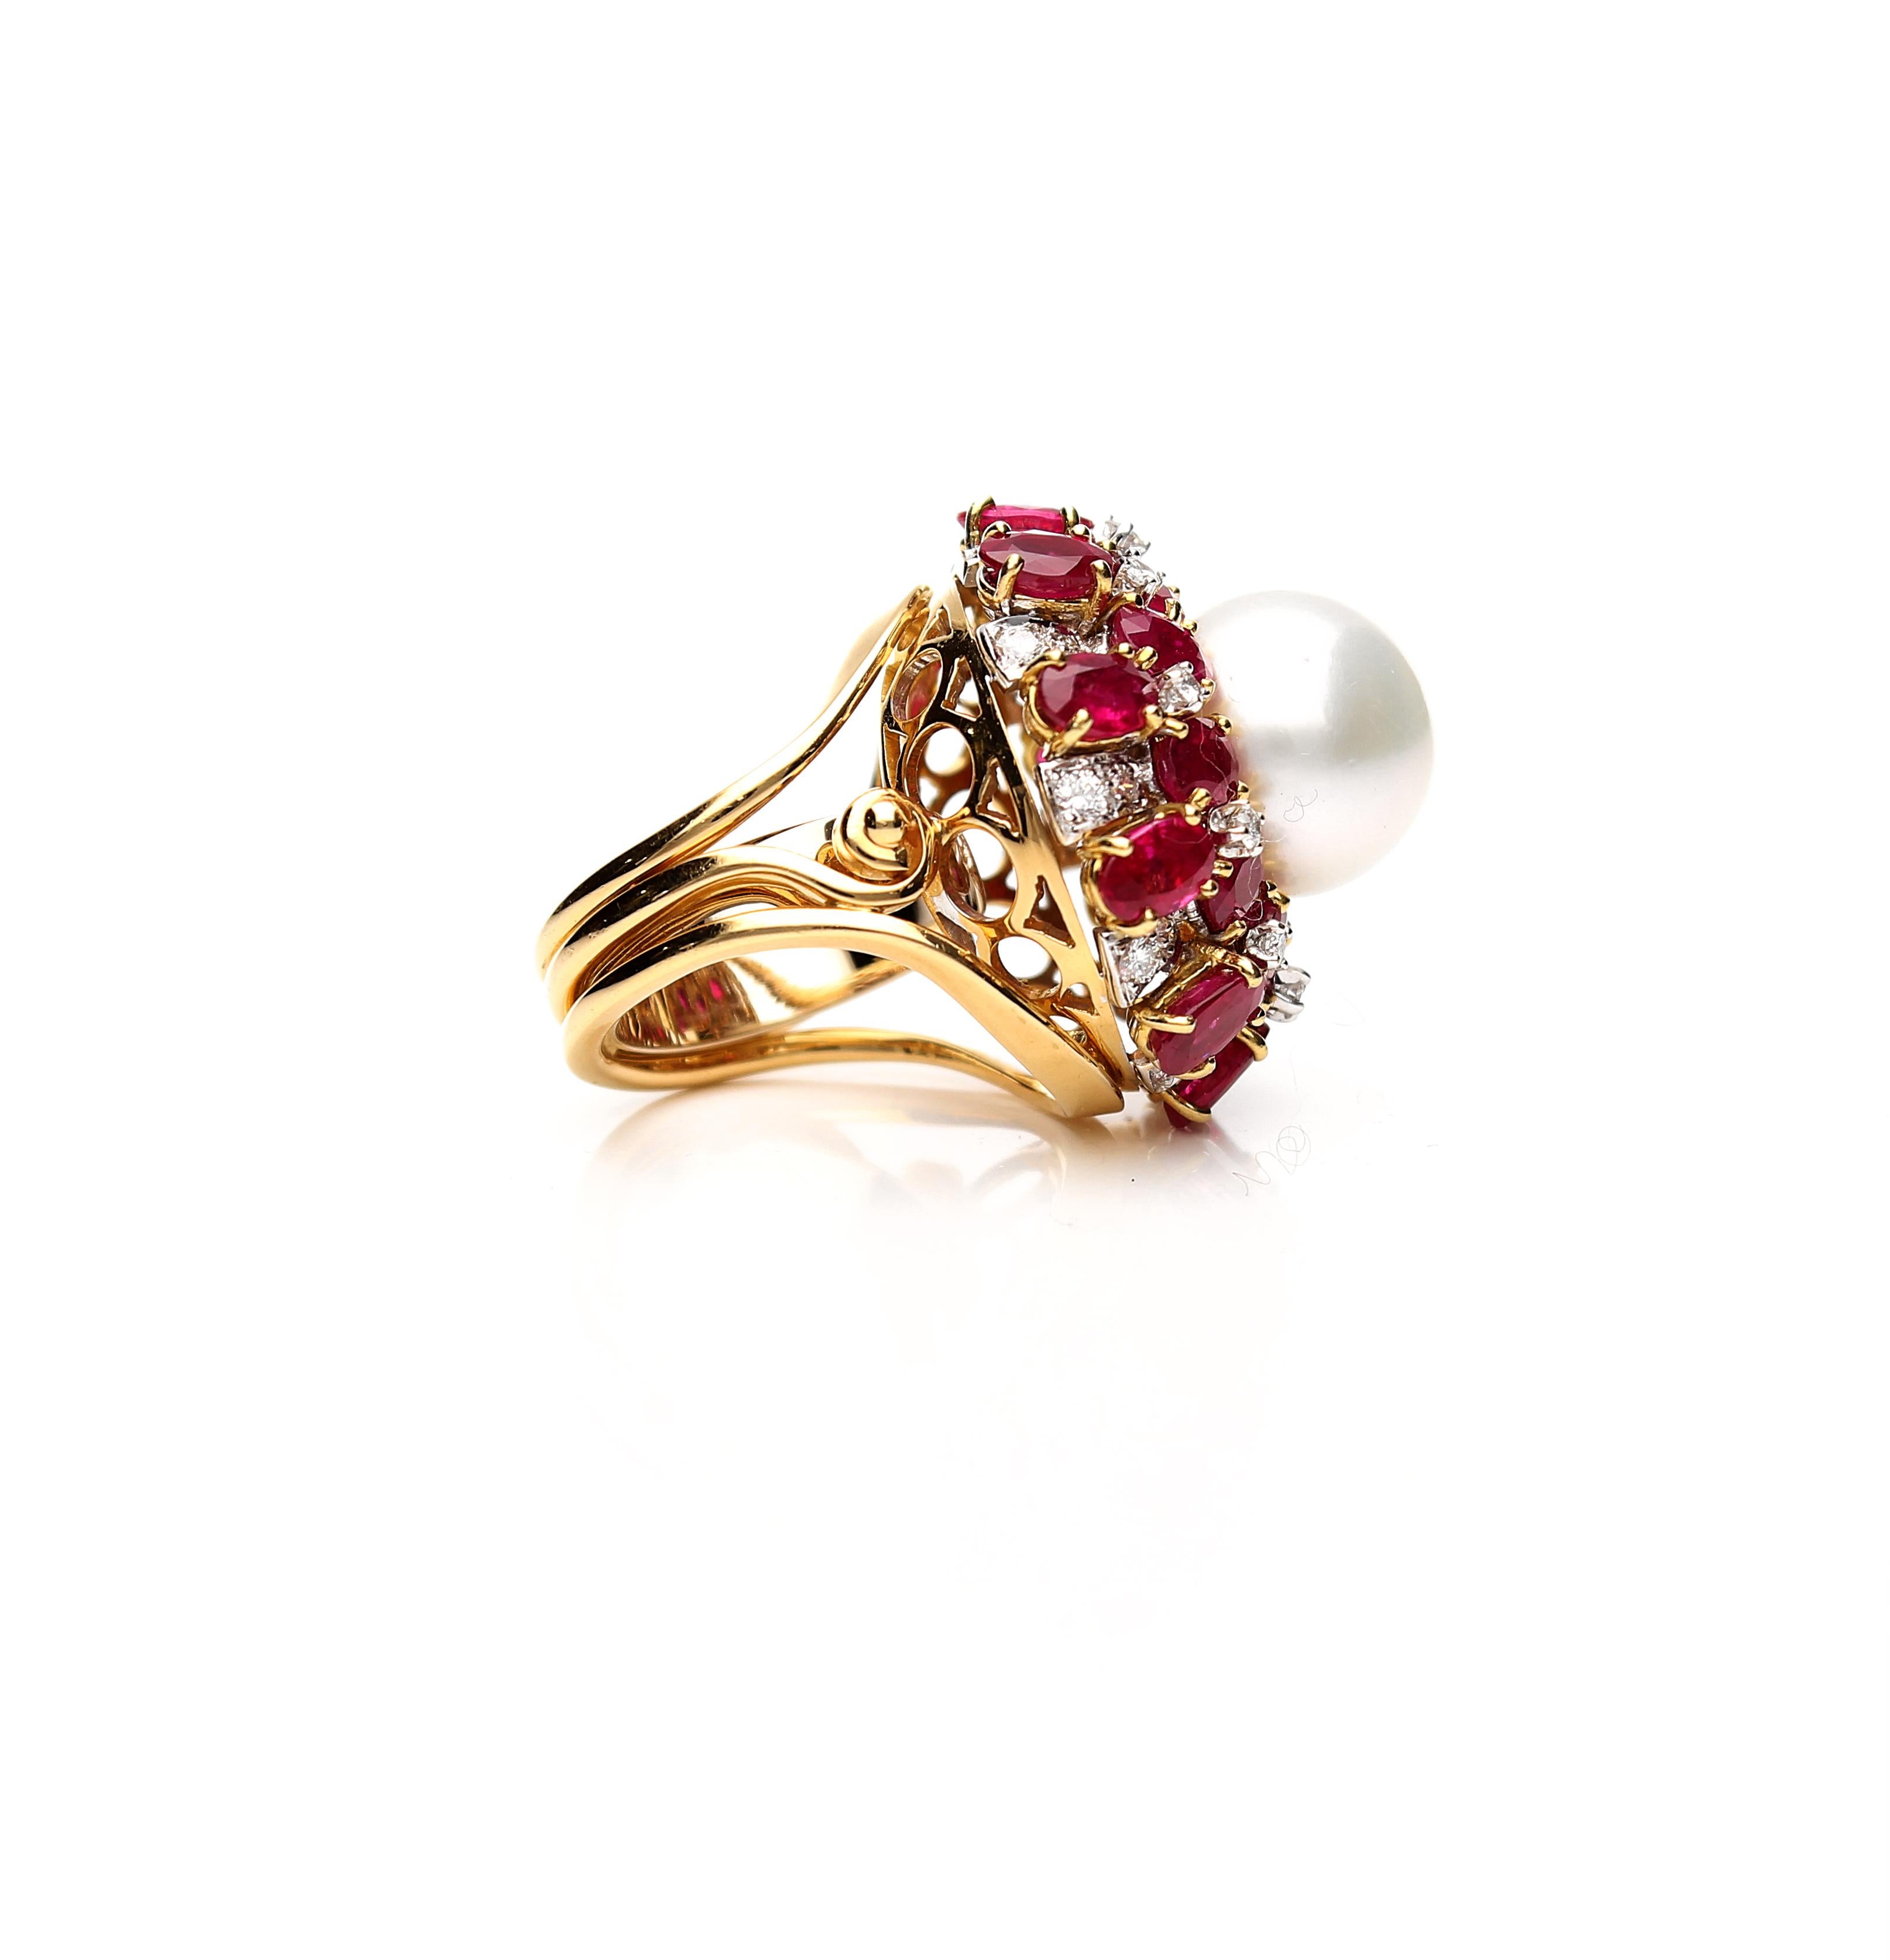 Retro 18 Karat Gold Ring with Oval Cut Rubies, Diamonds and South Sea Pearl